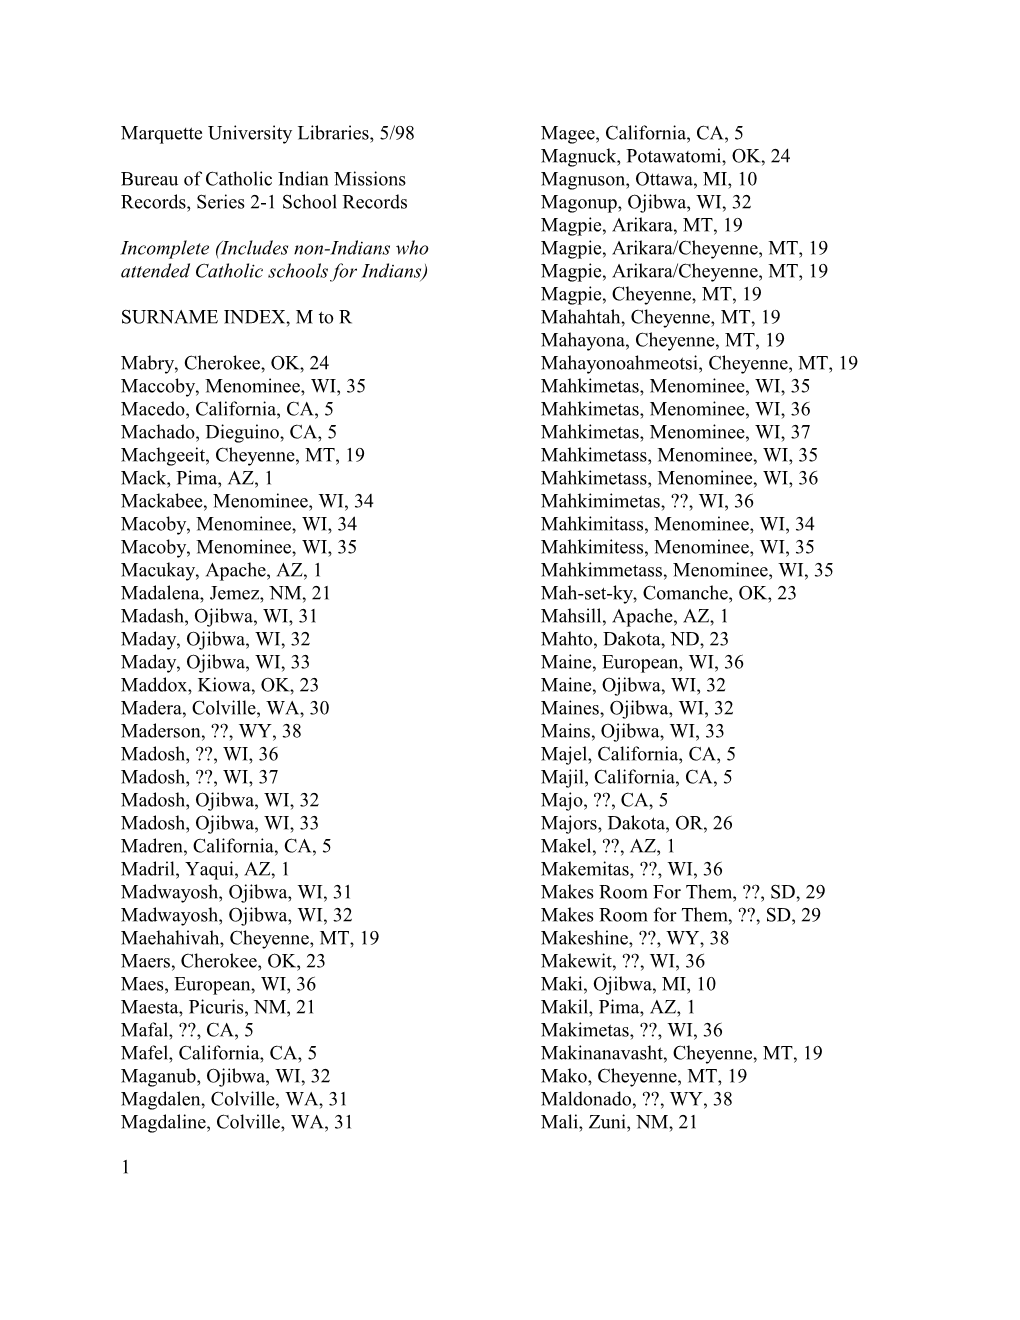 Bureau of Catholic Indian Missions Records, Series 2-1 School Records